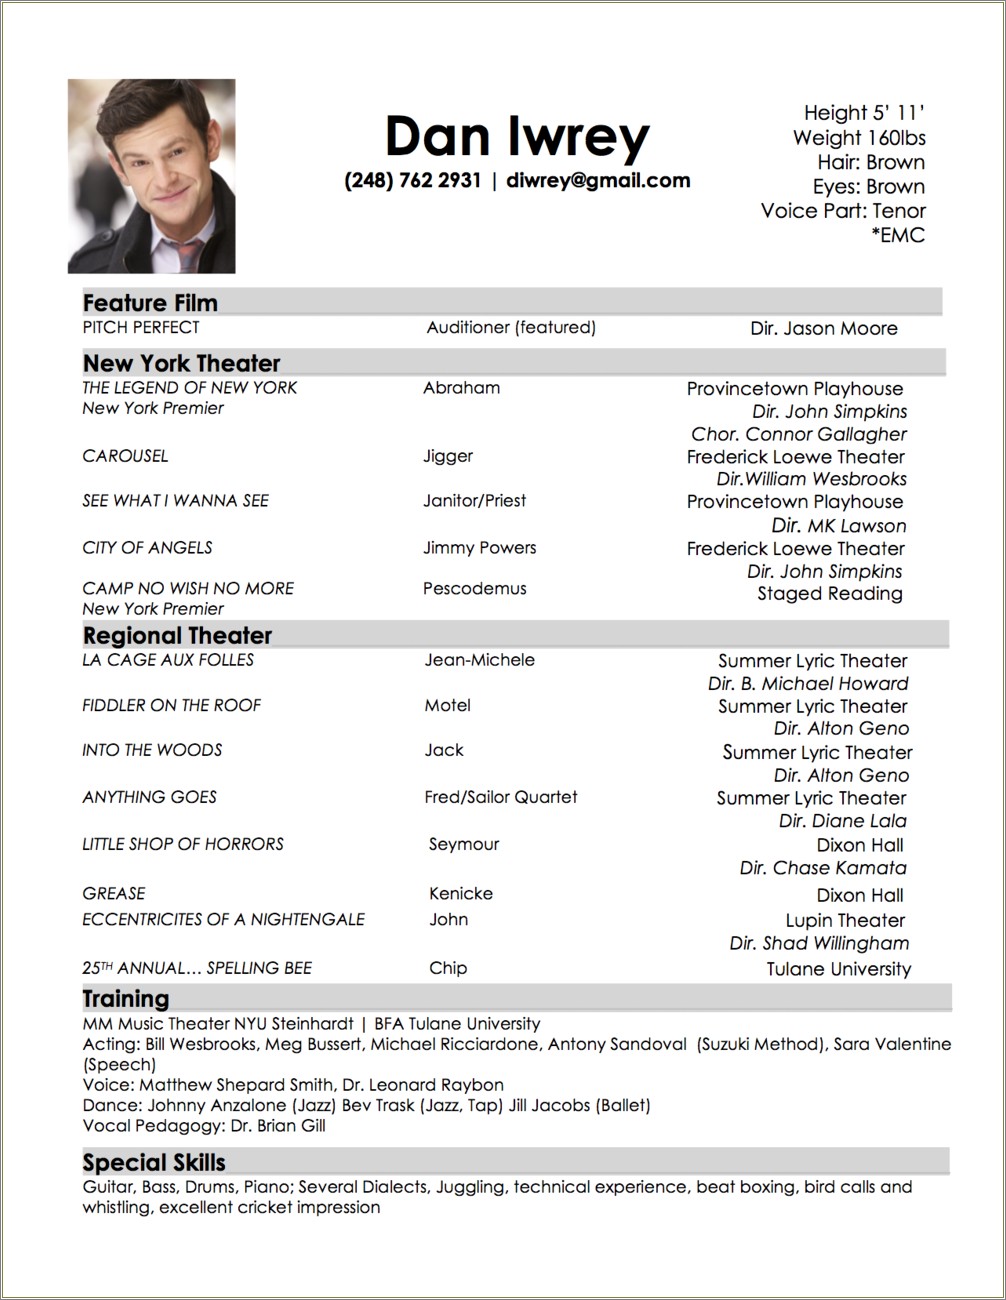 Sample Resume For Casting Call